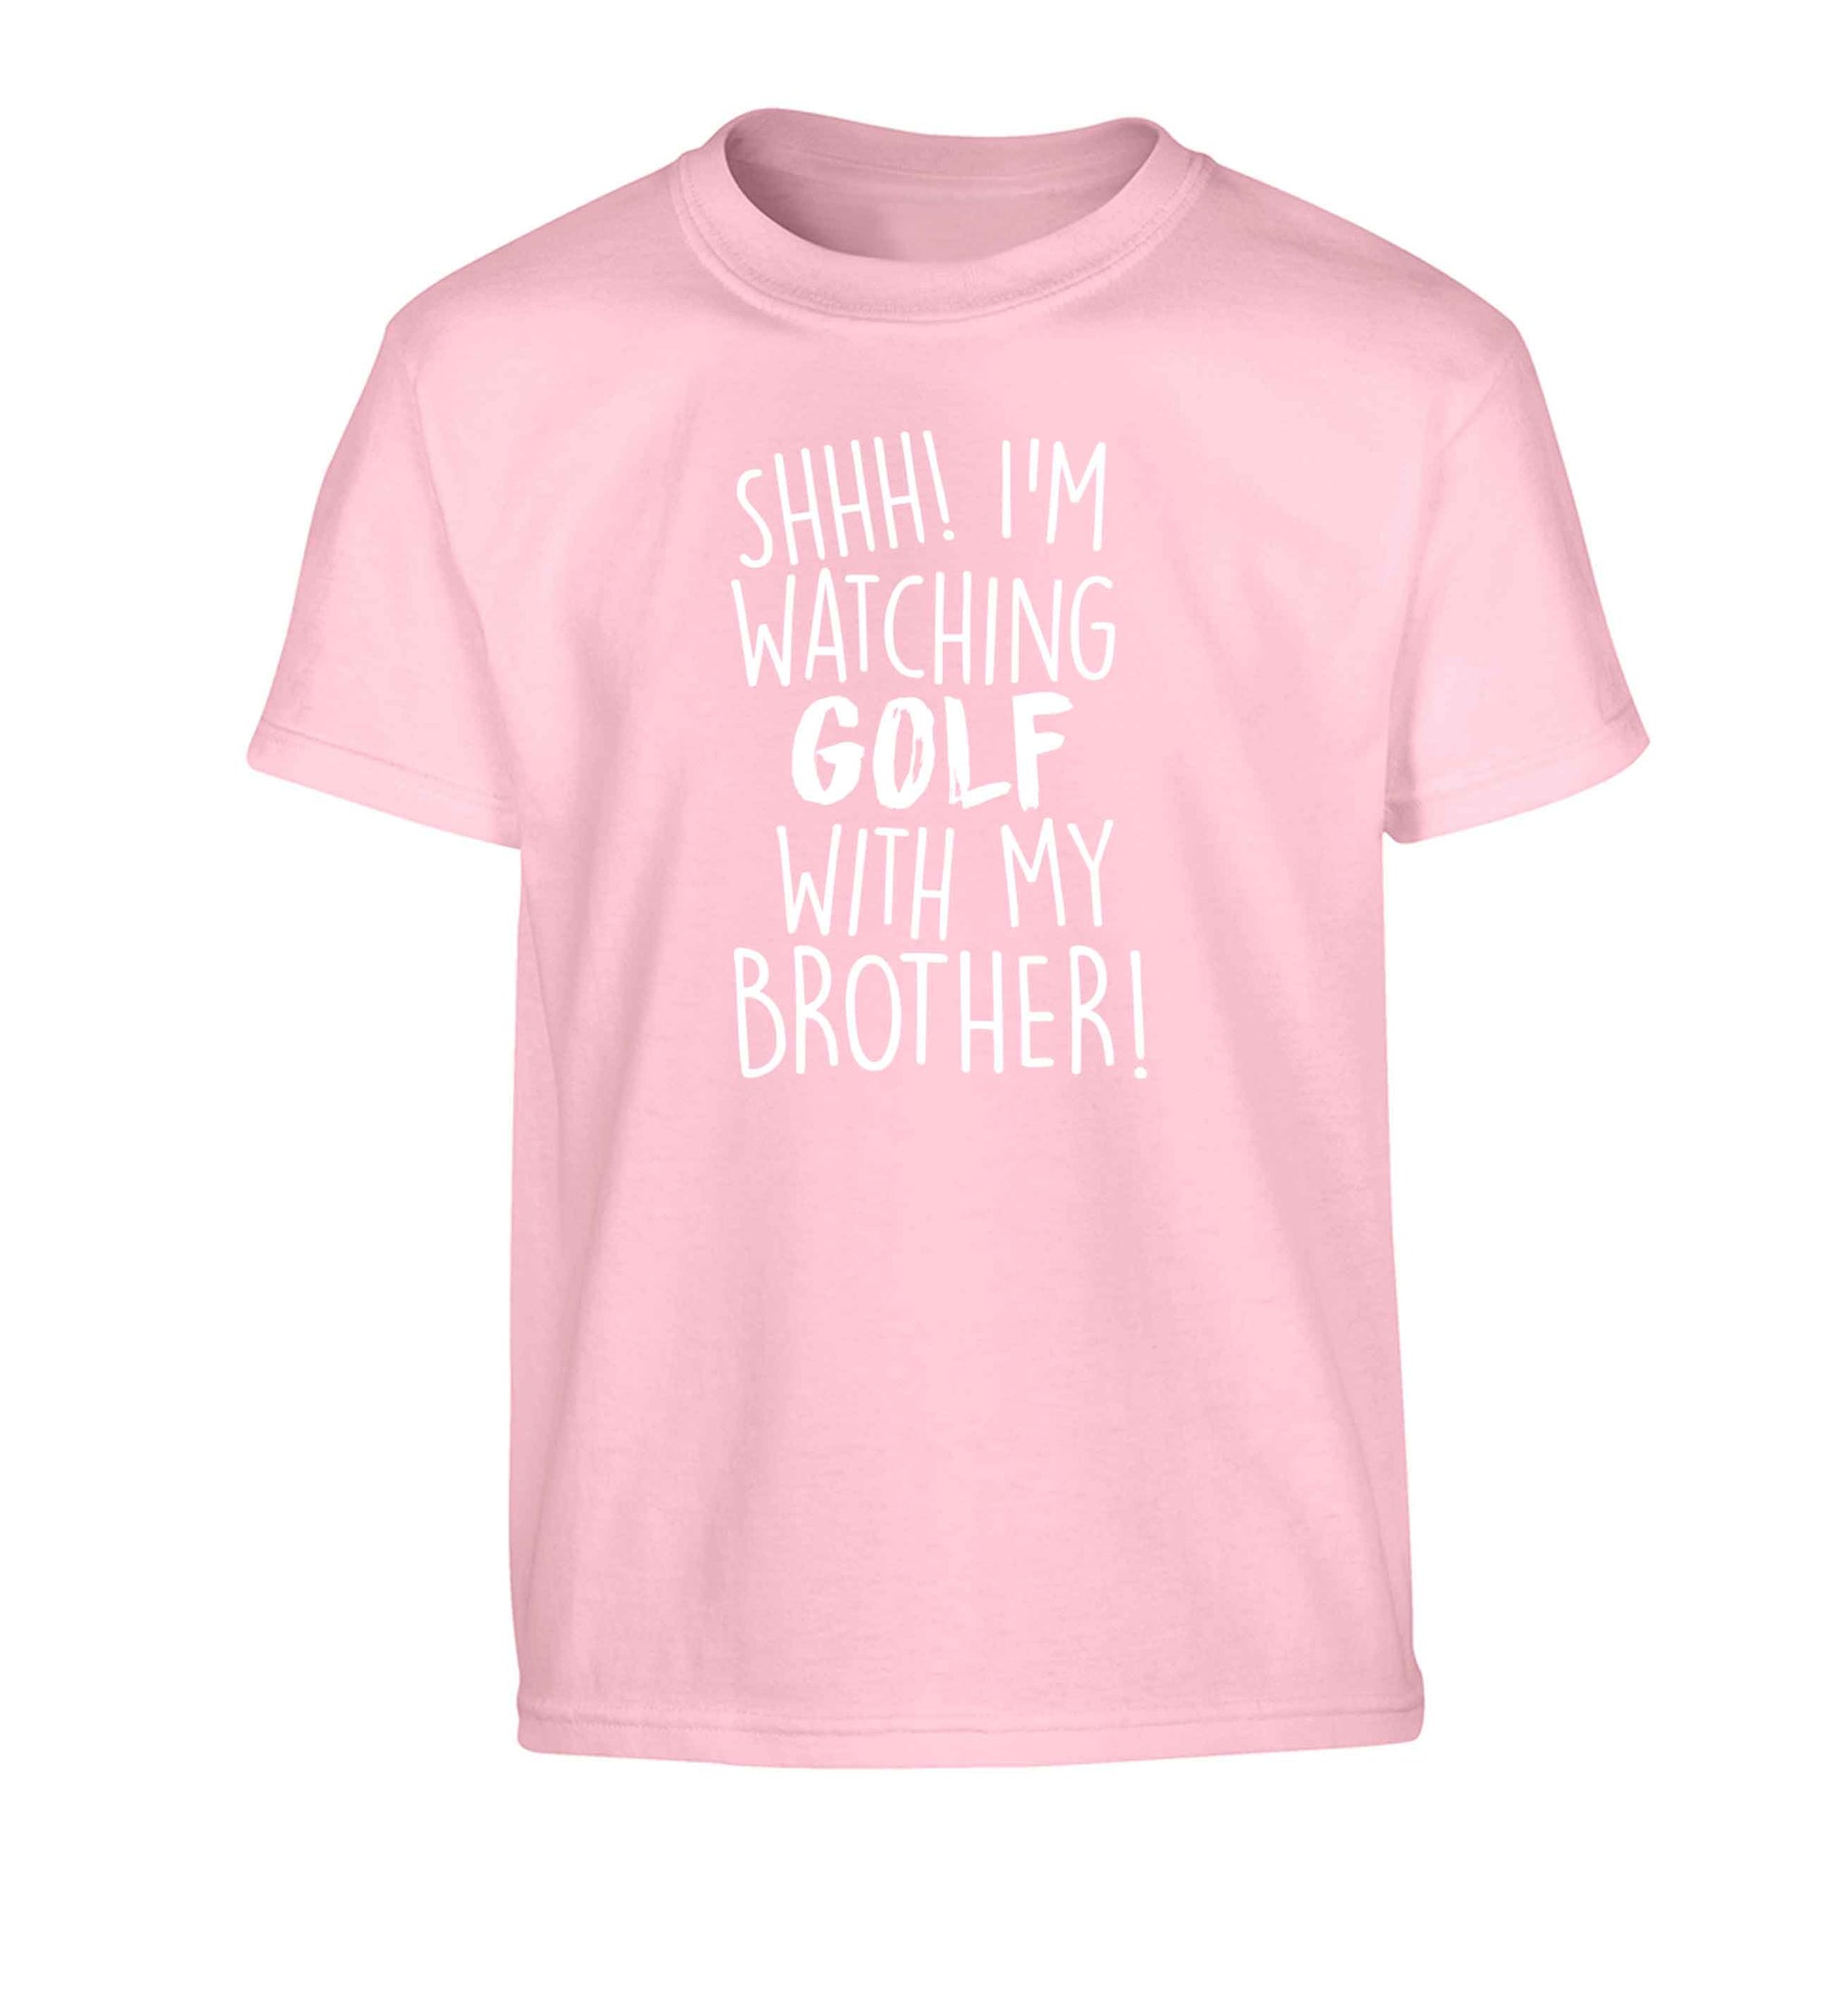 Shh I'm watching golf with my brother Children's light pink Tshirt 12-13 Years